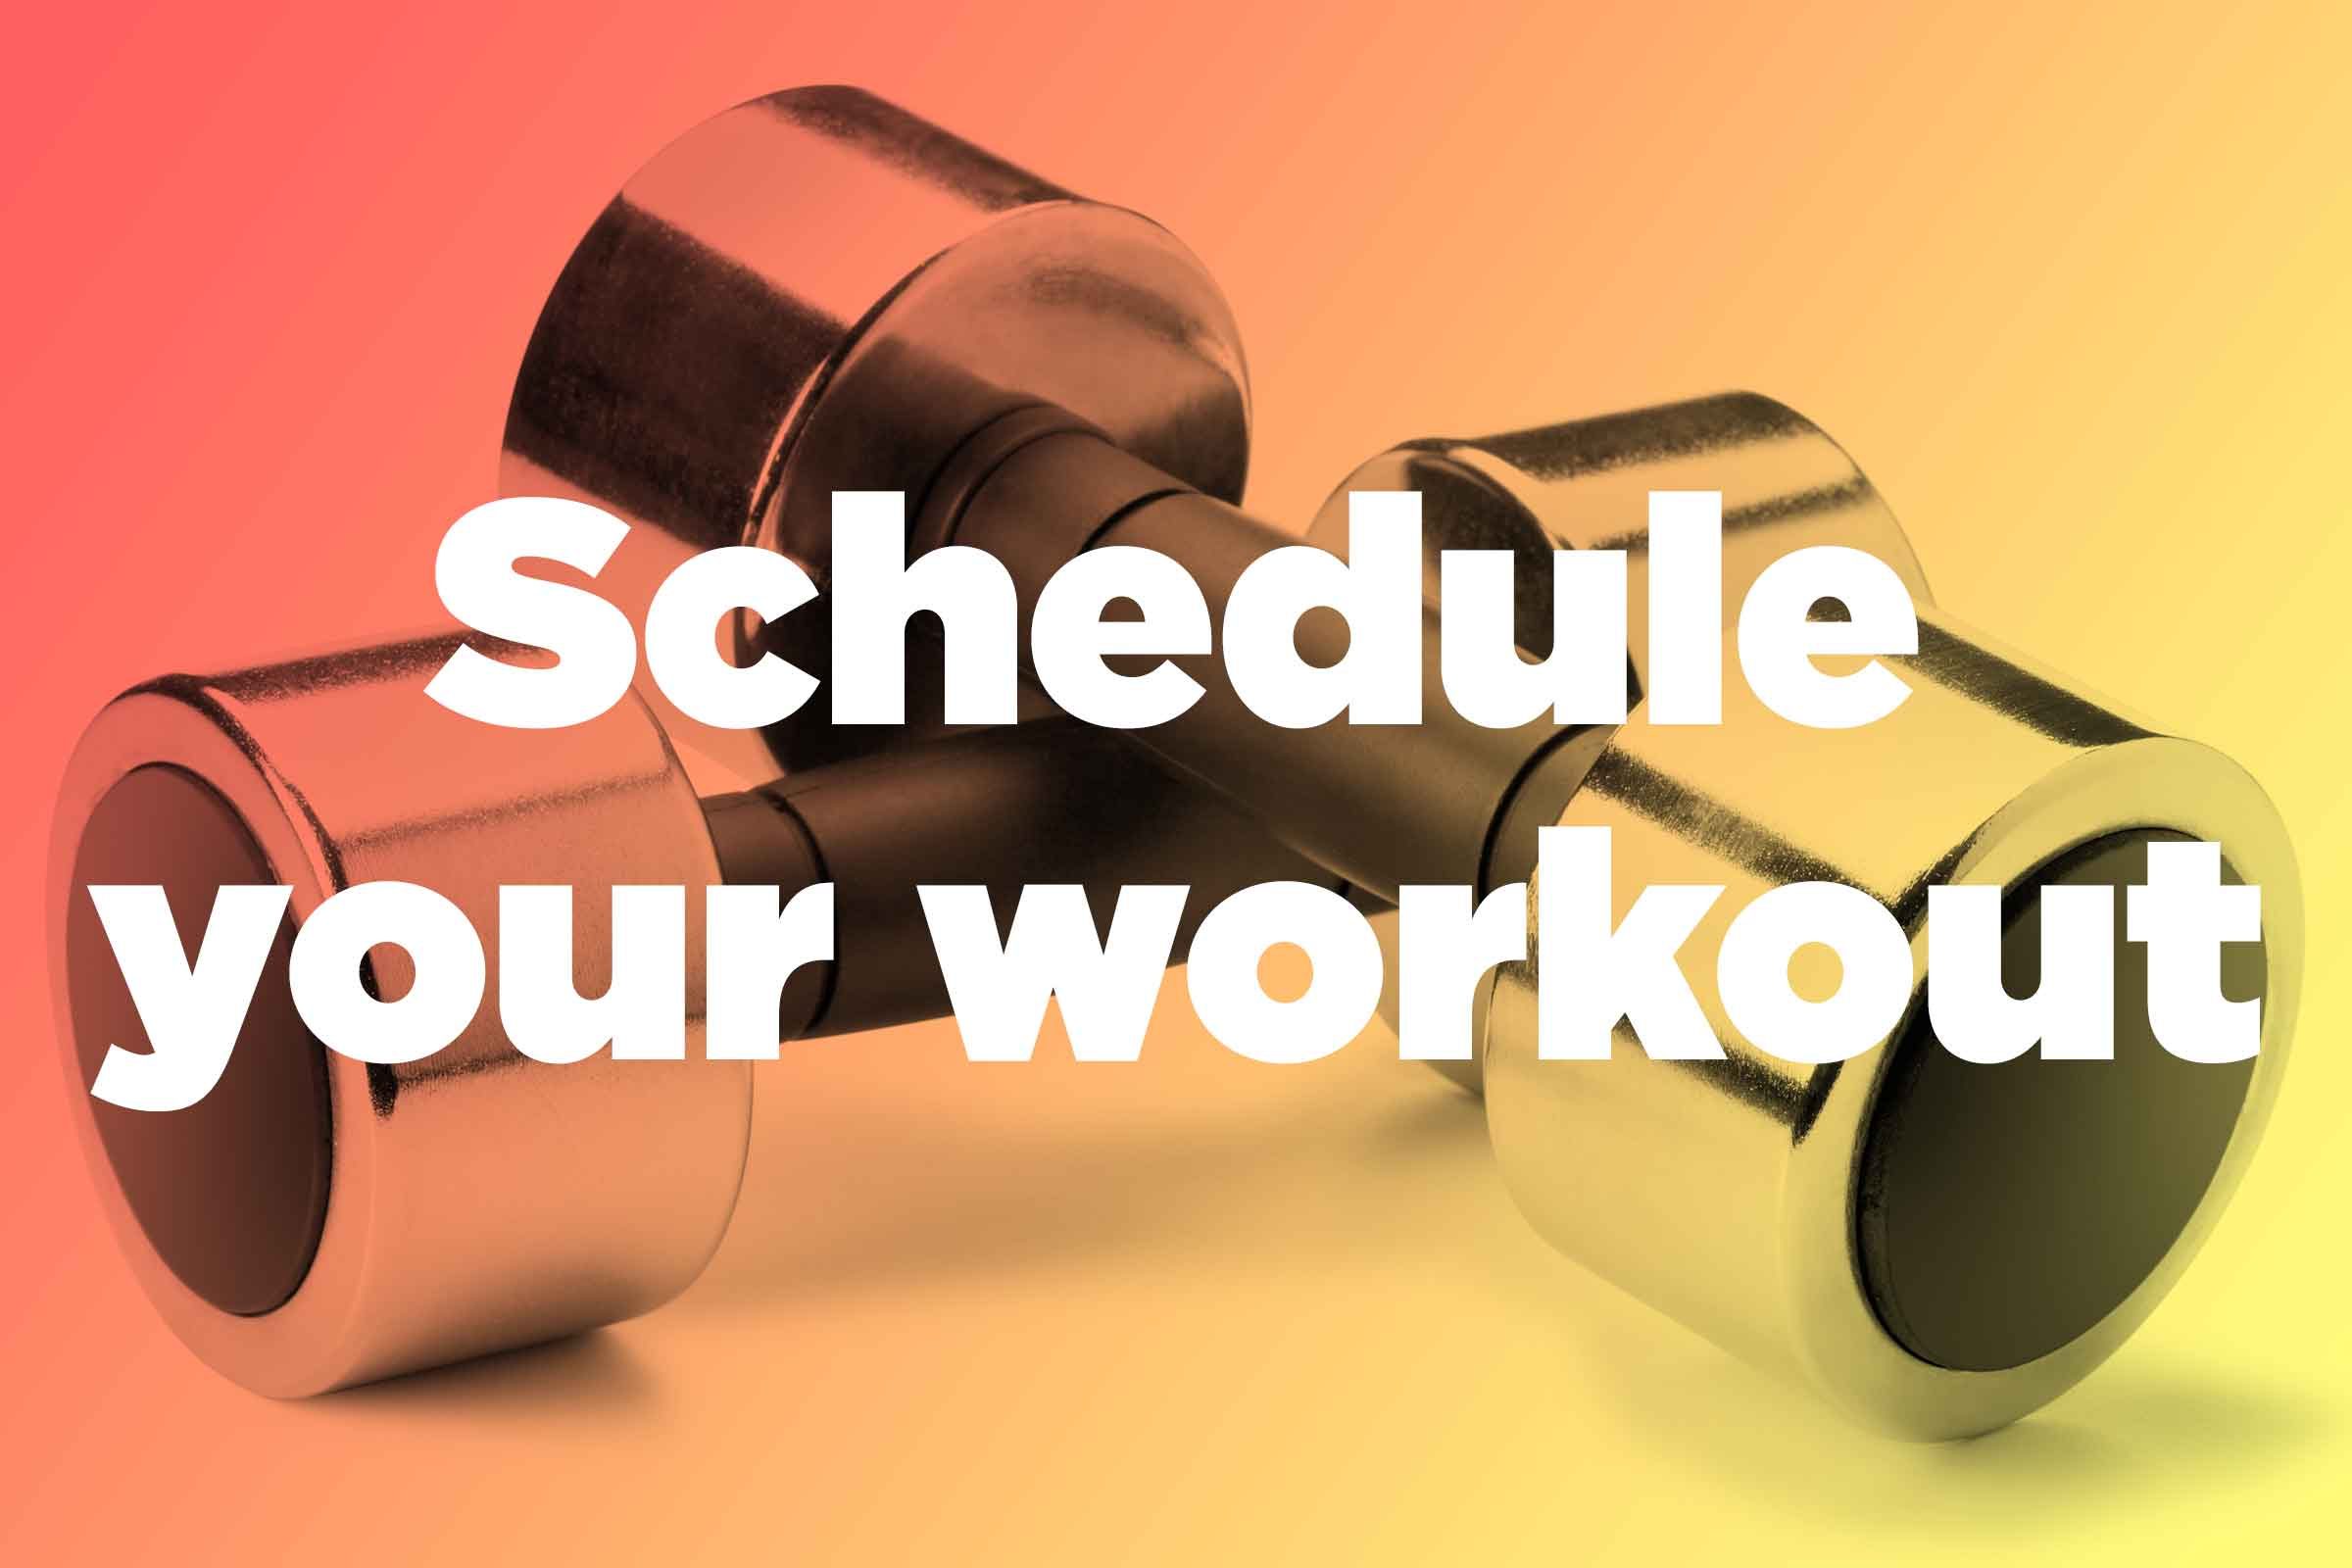 Schedule your workout like you would an appointment